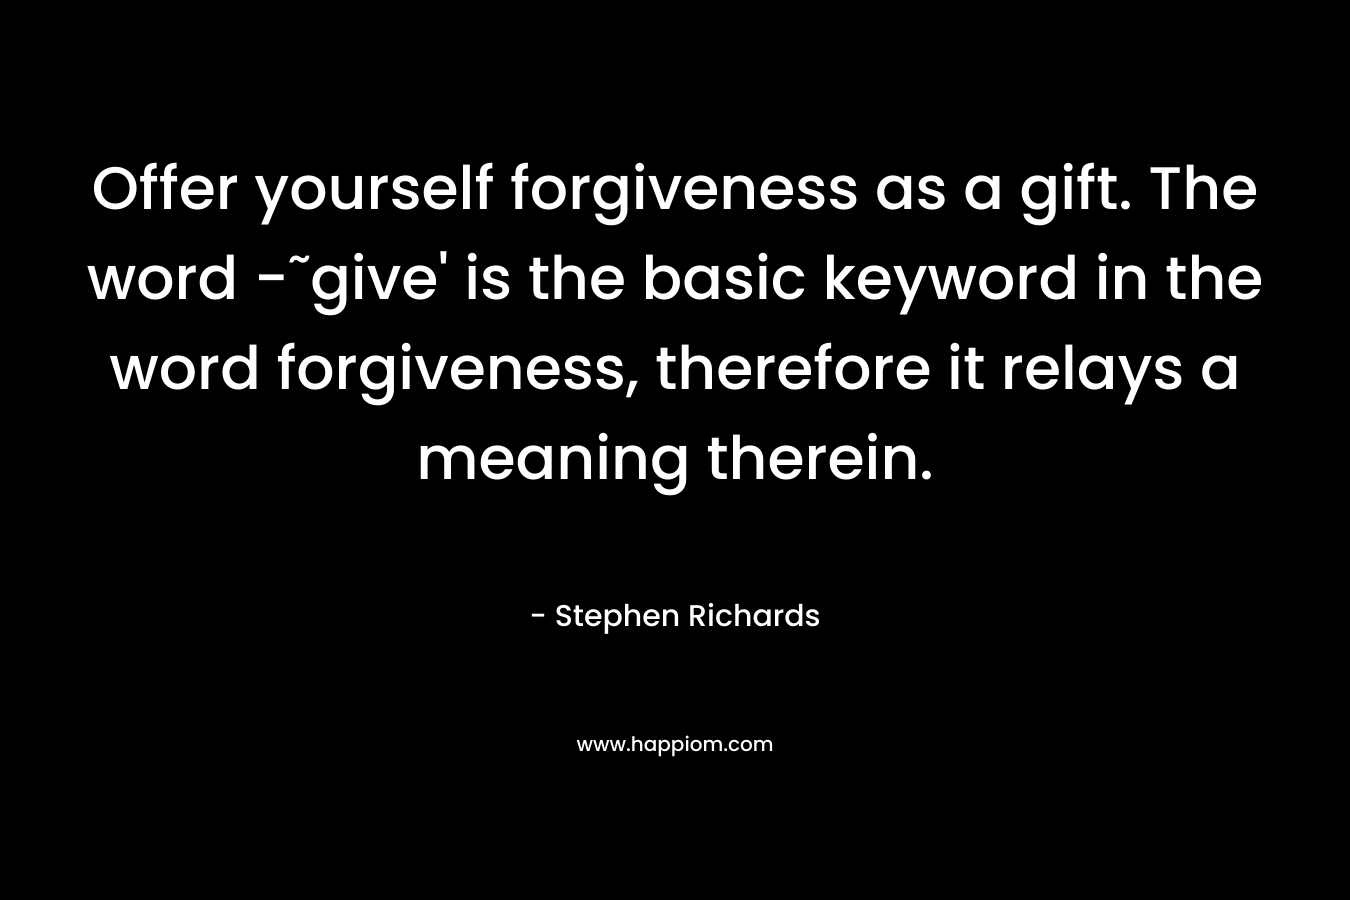 Offer yourself forgiveness as a gift. The word -˜give' is the basic keyword in the word forgiveness, therefore it relays a meaning therein.